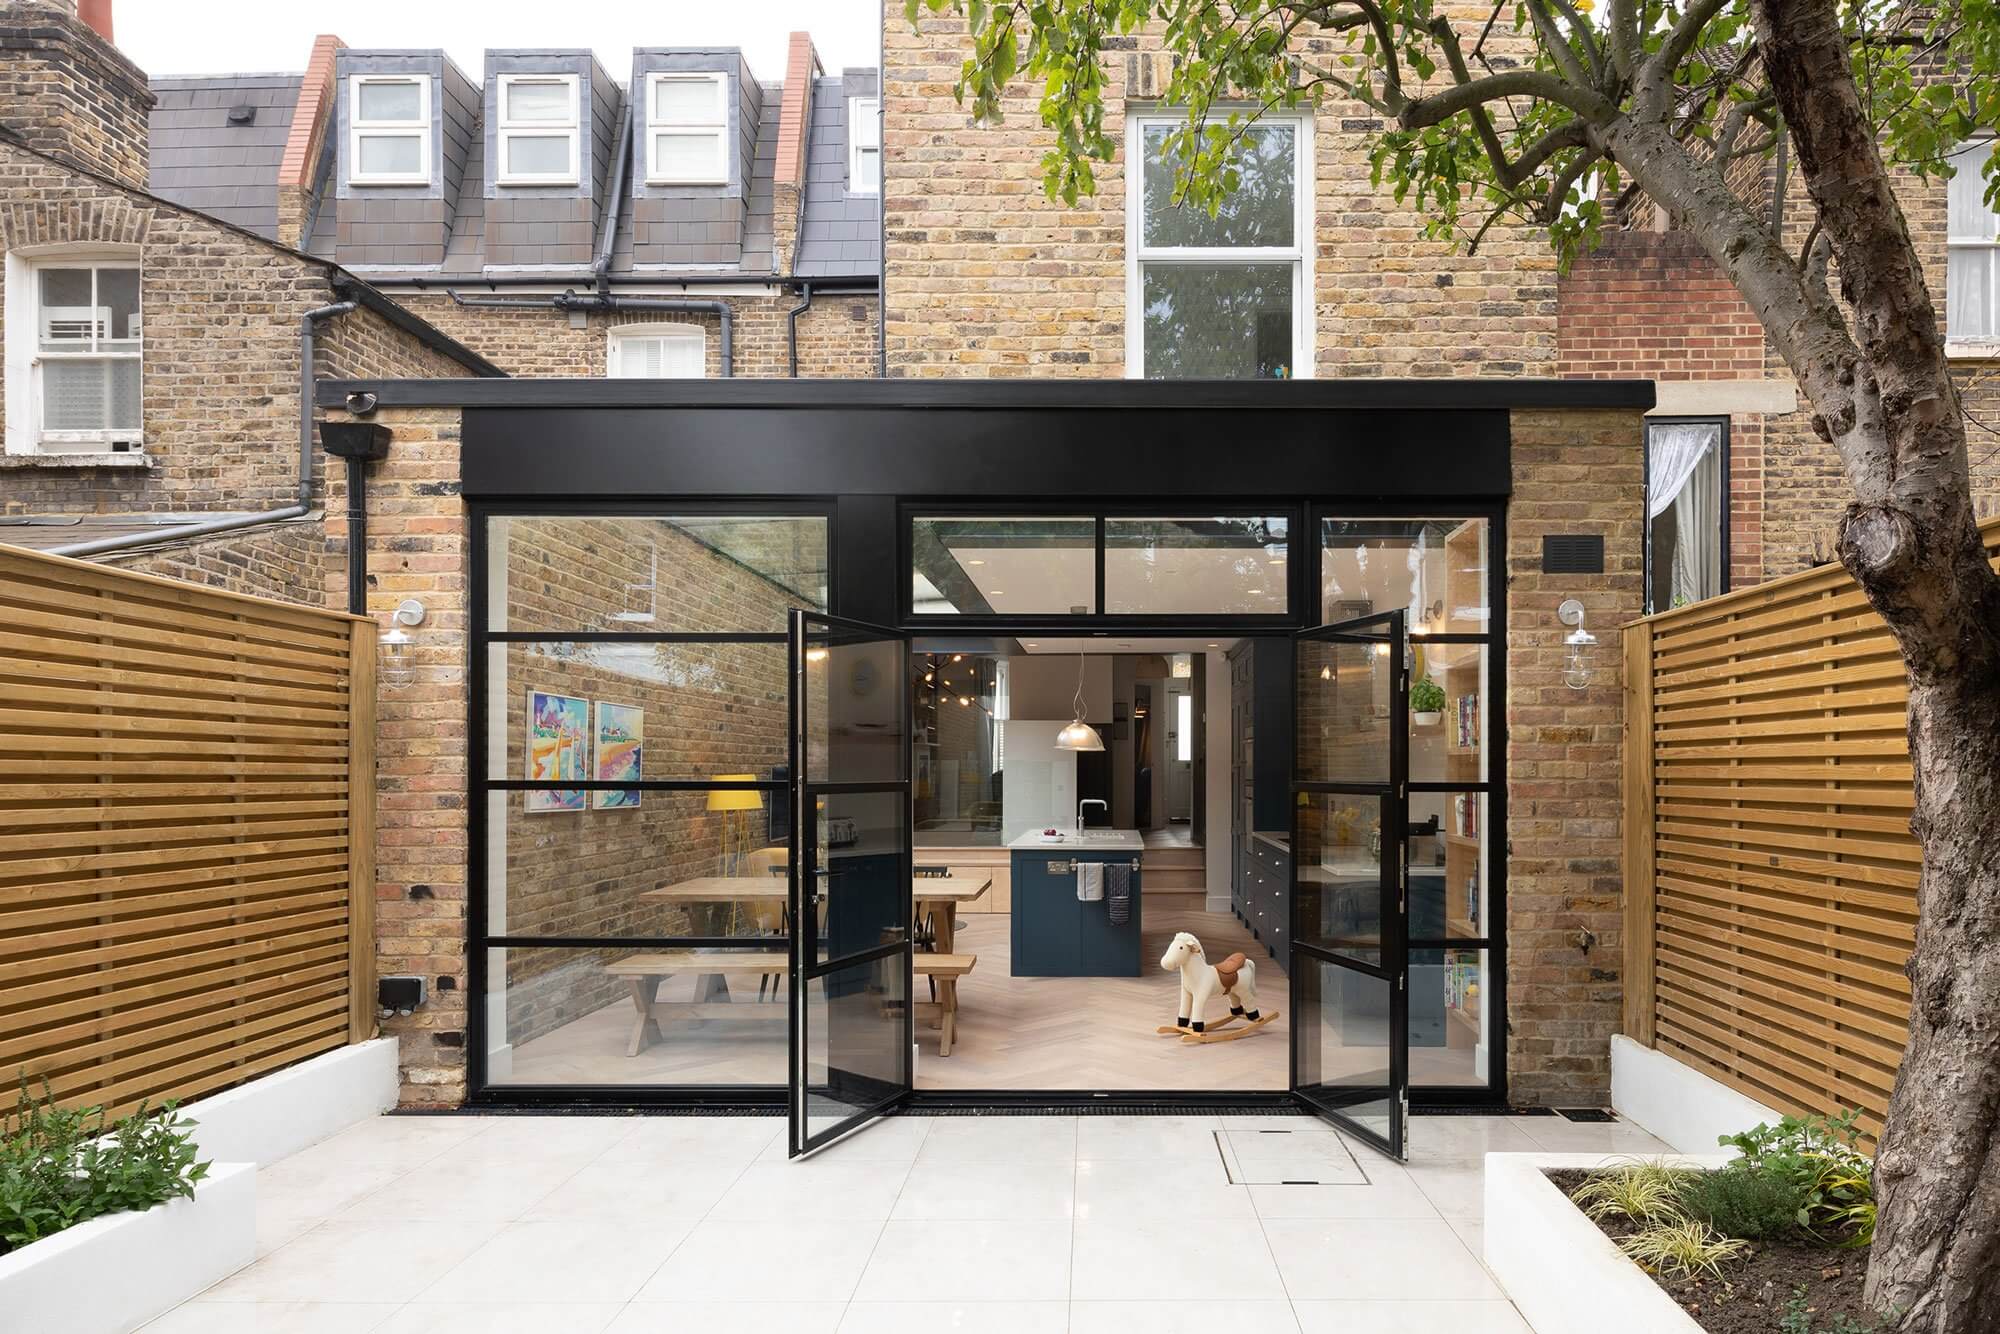 12 Ways To Add Value Your Home, Does A Garage Conversion Add Value